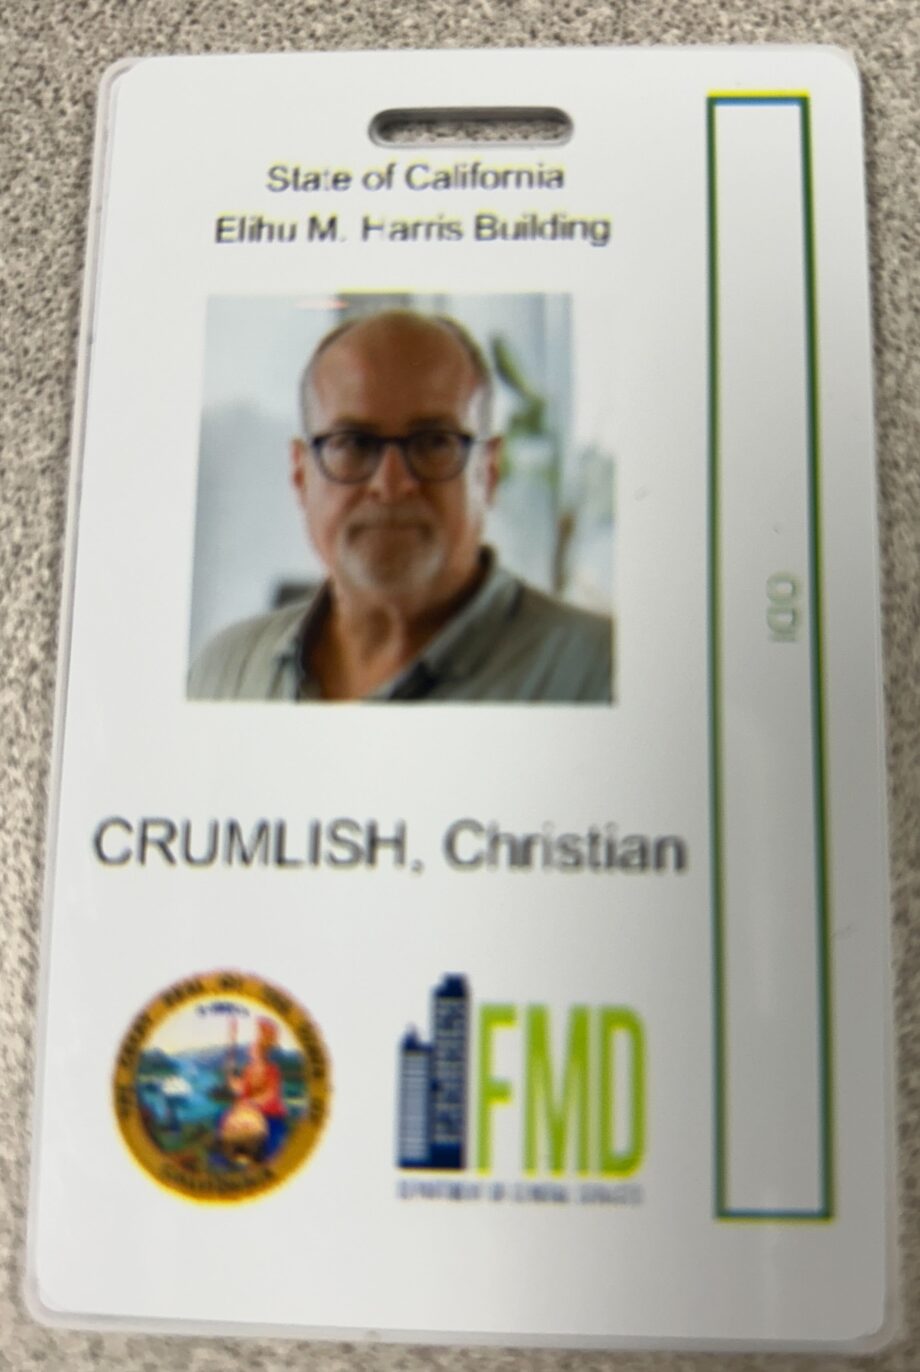 My badge for the state office building in Oakland, my hub.